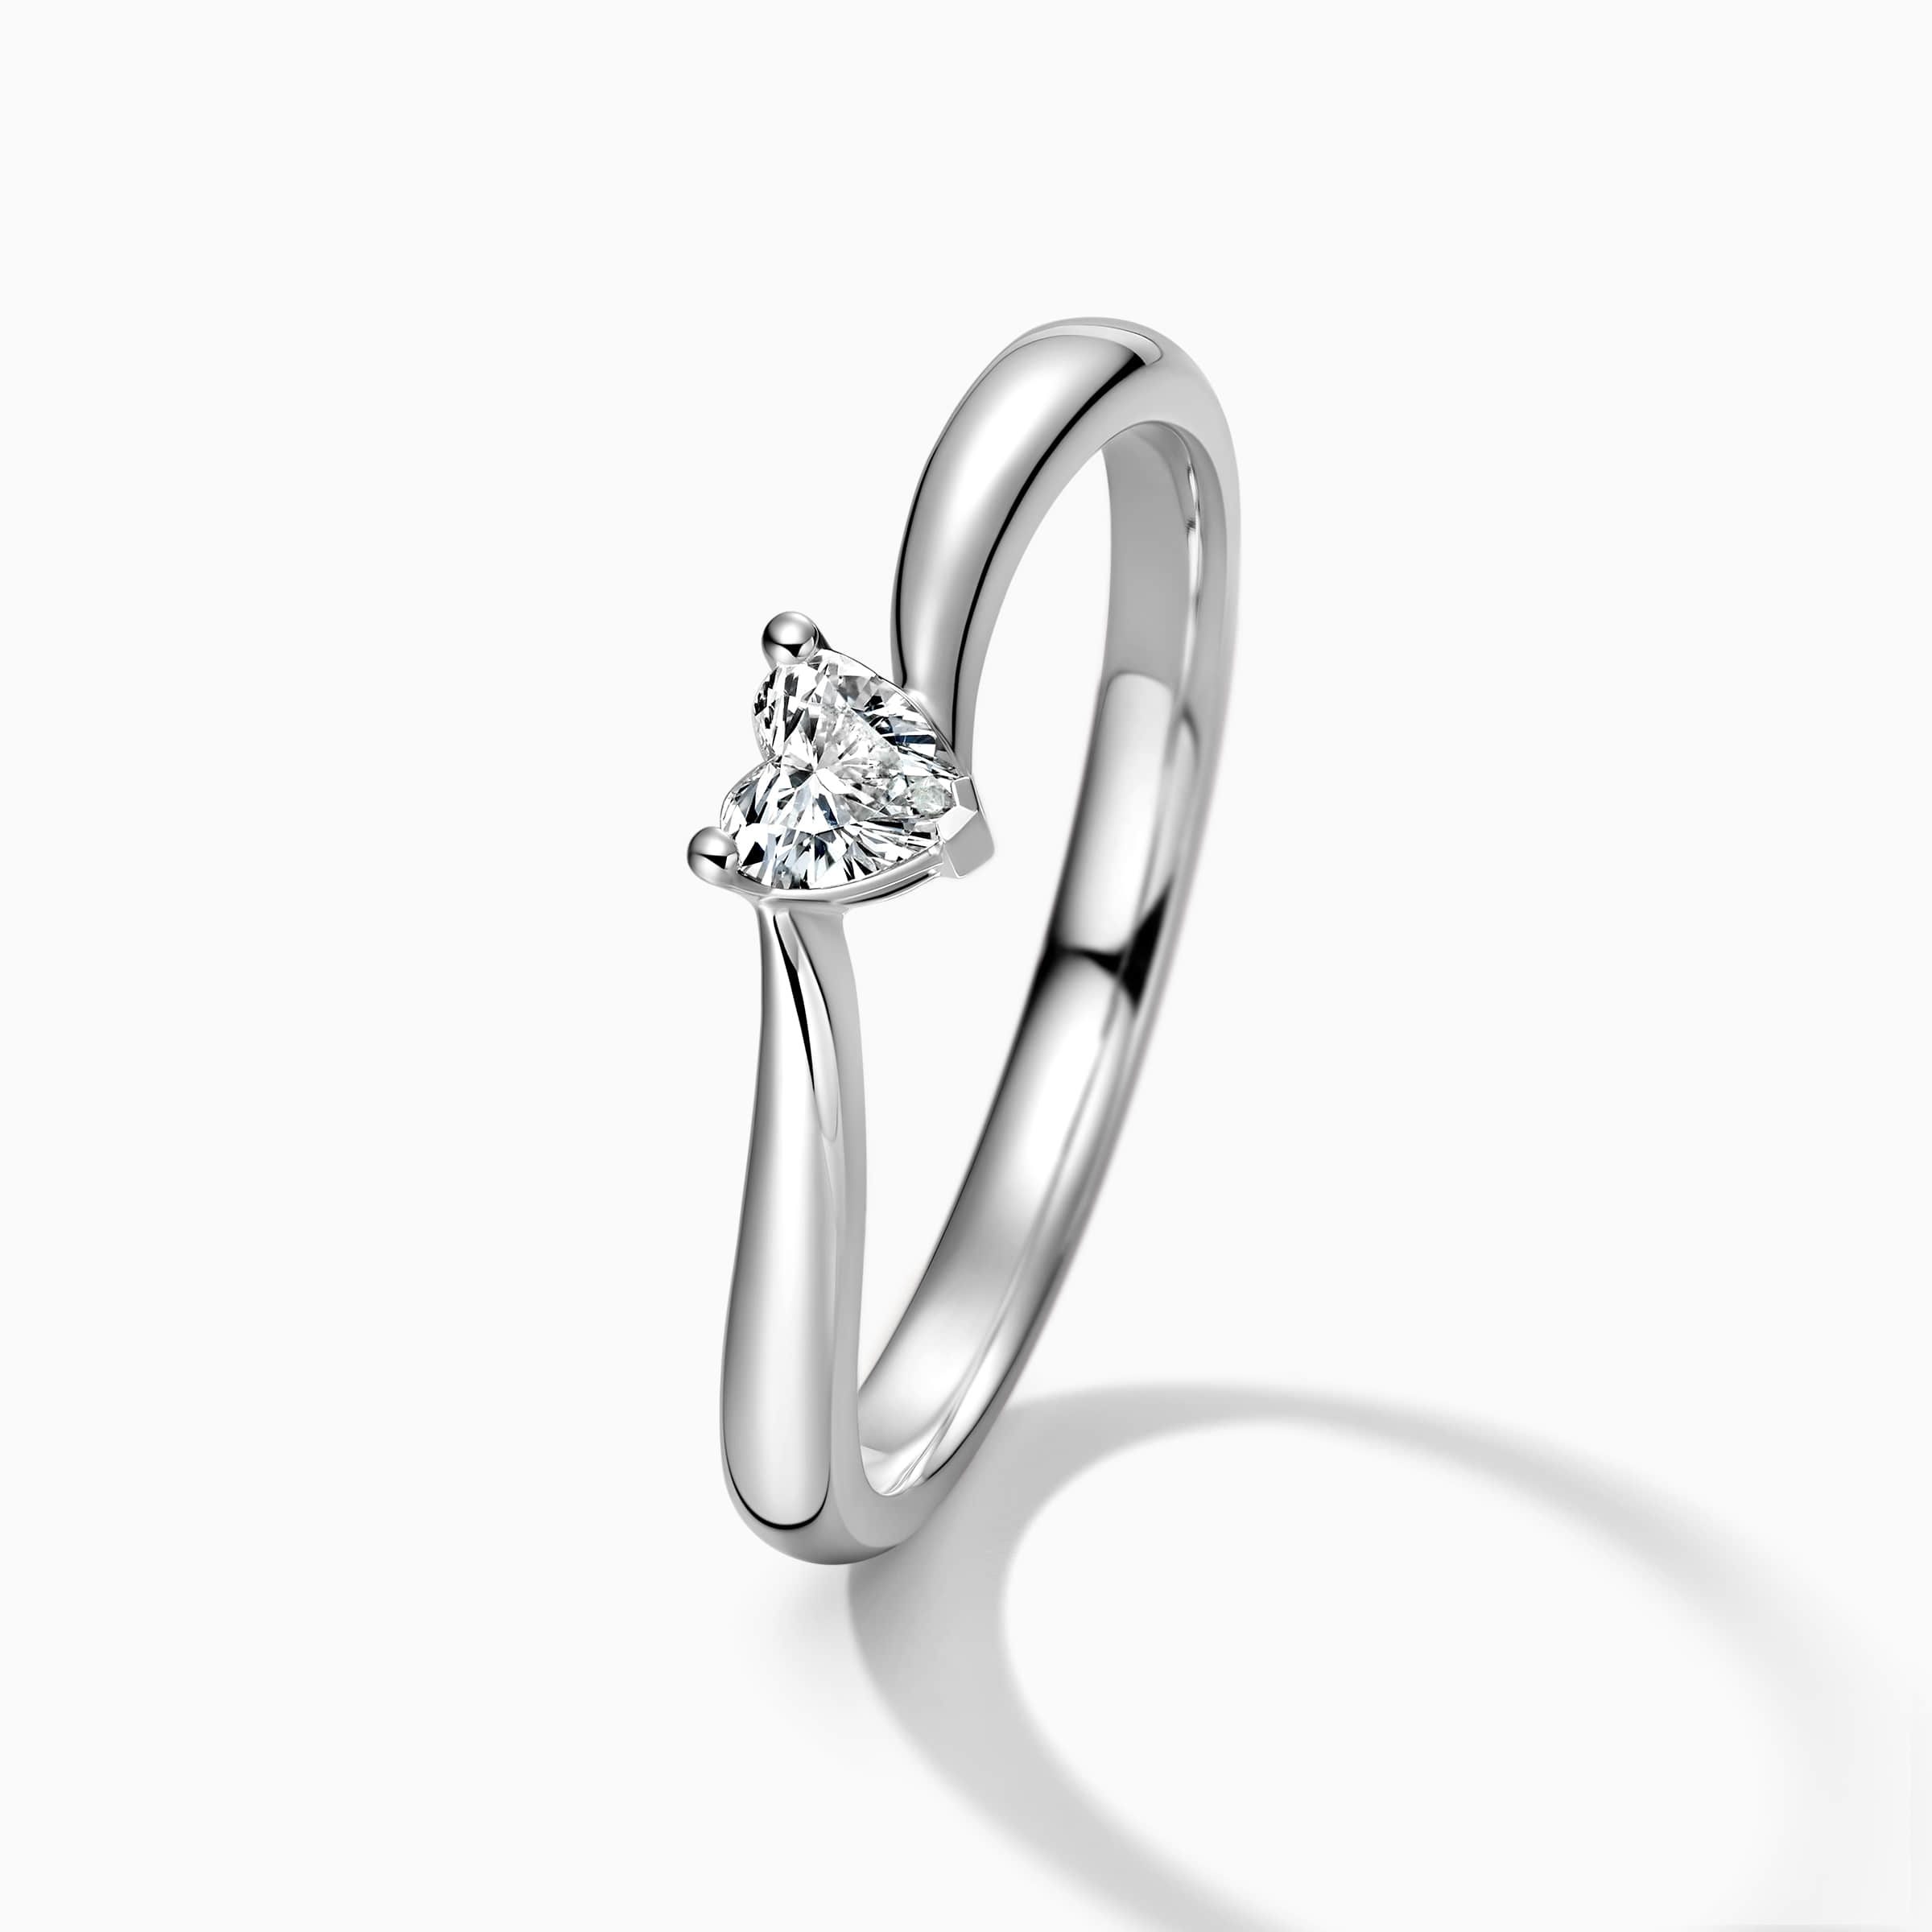 Darry Ring heart solitaire promise ring top view